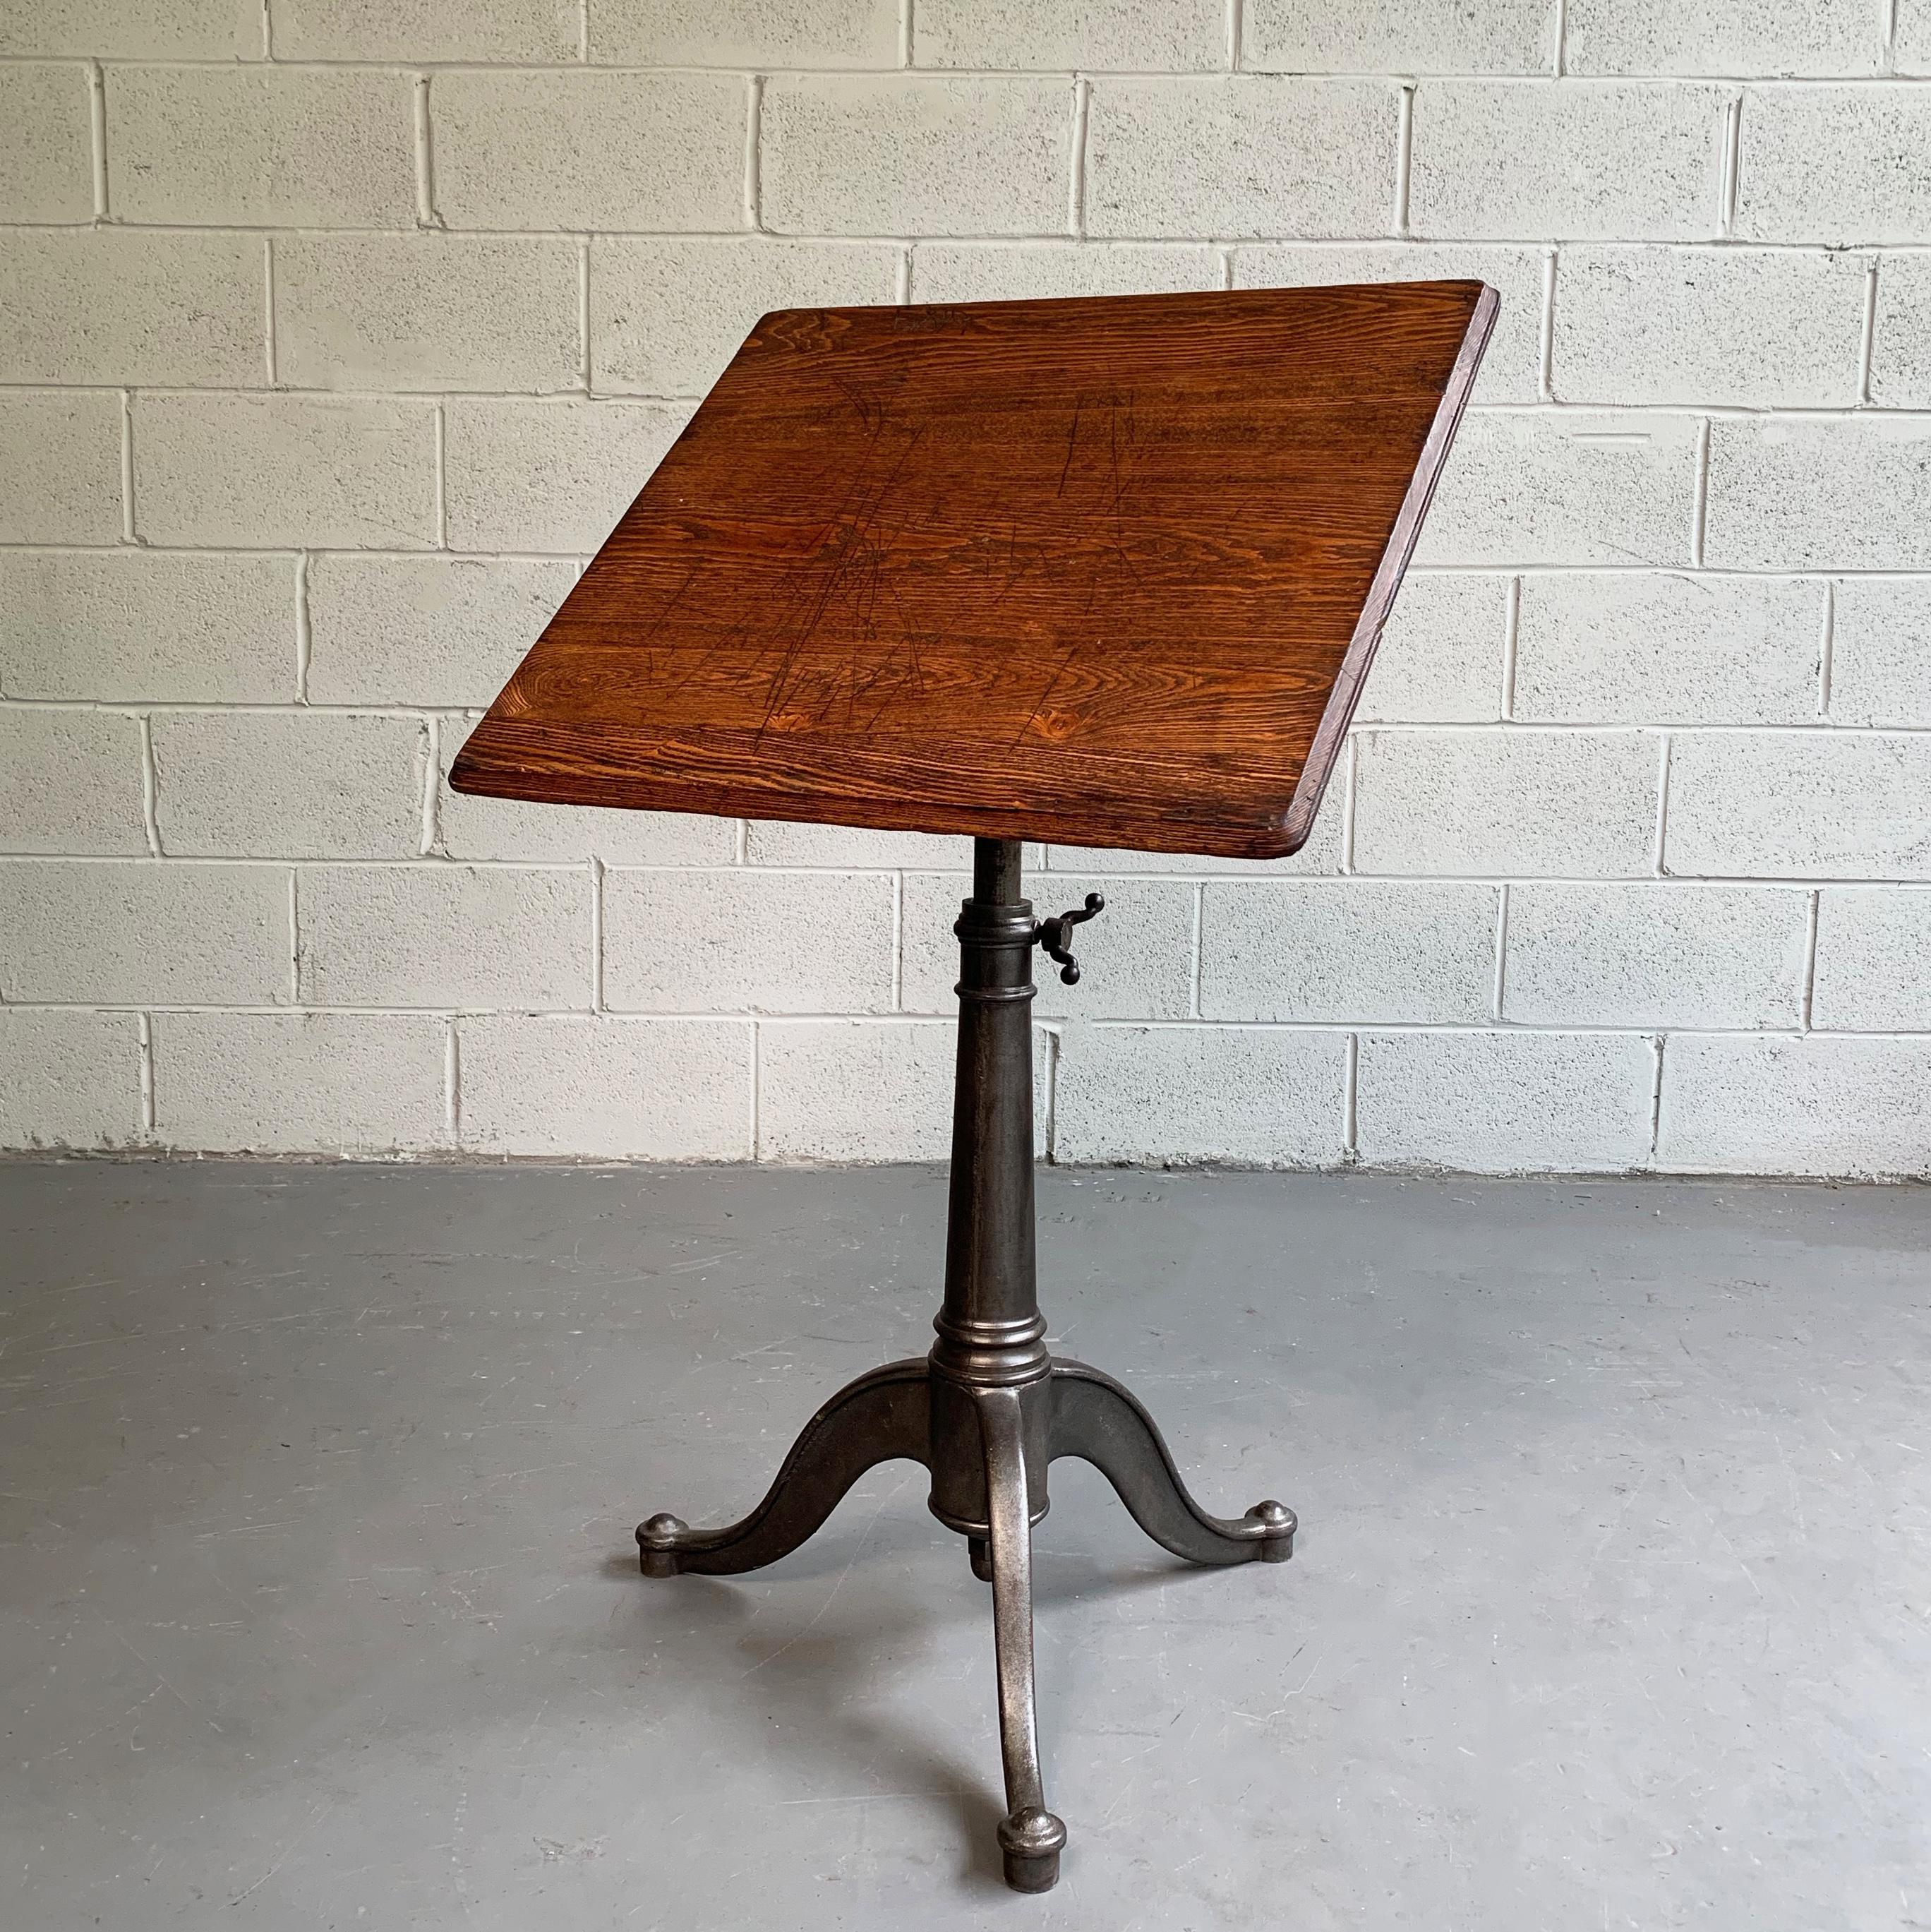 Small, antique, artist rendering easel table features an oak top on a tilt and height adjustable, cast iron, pedestal base that adjusts from 29 - 40 inches height.